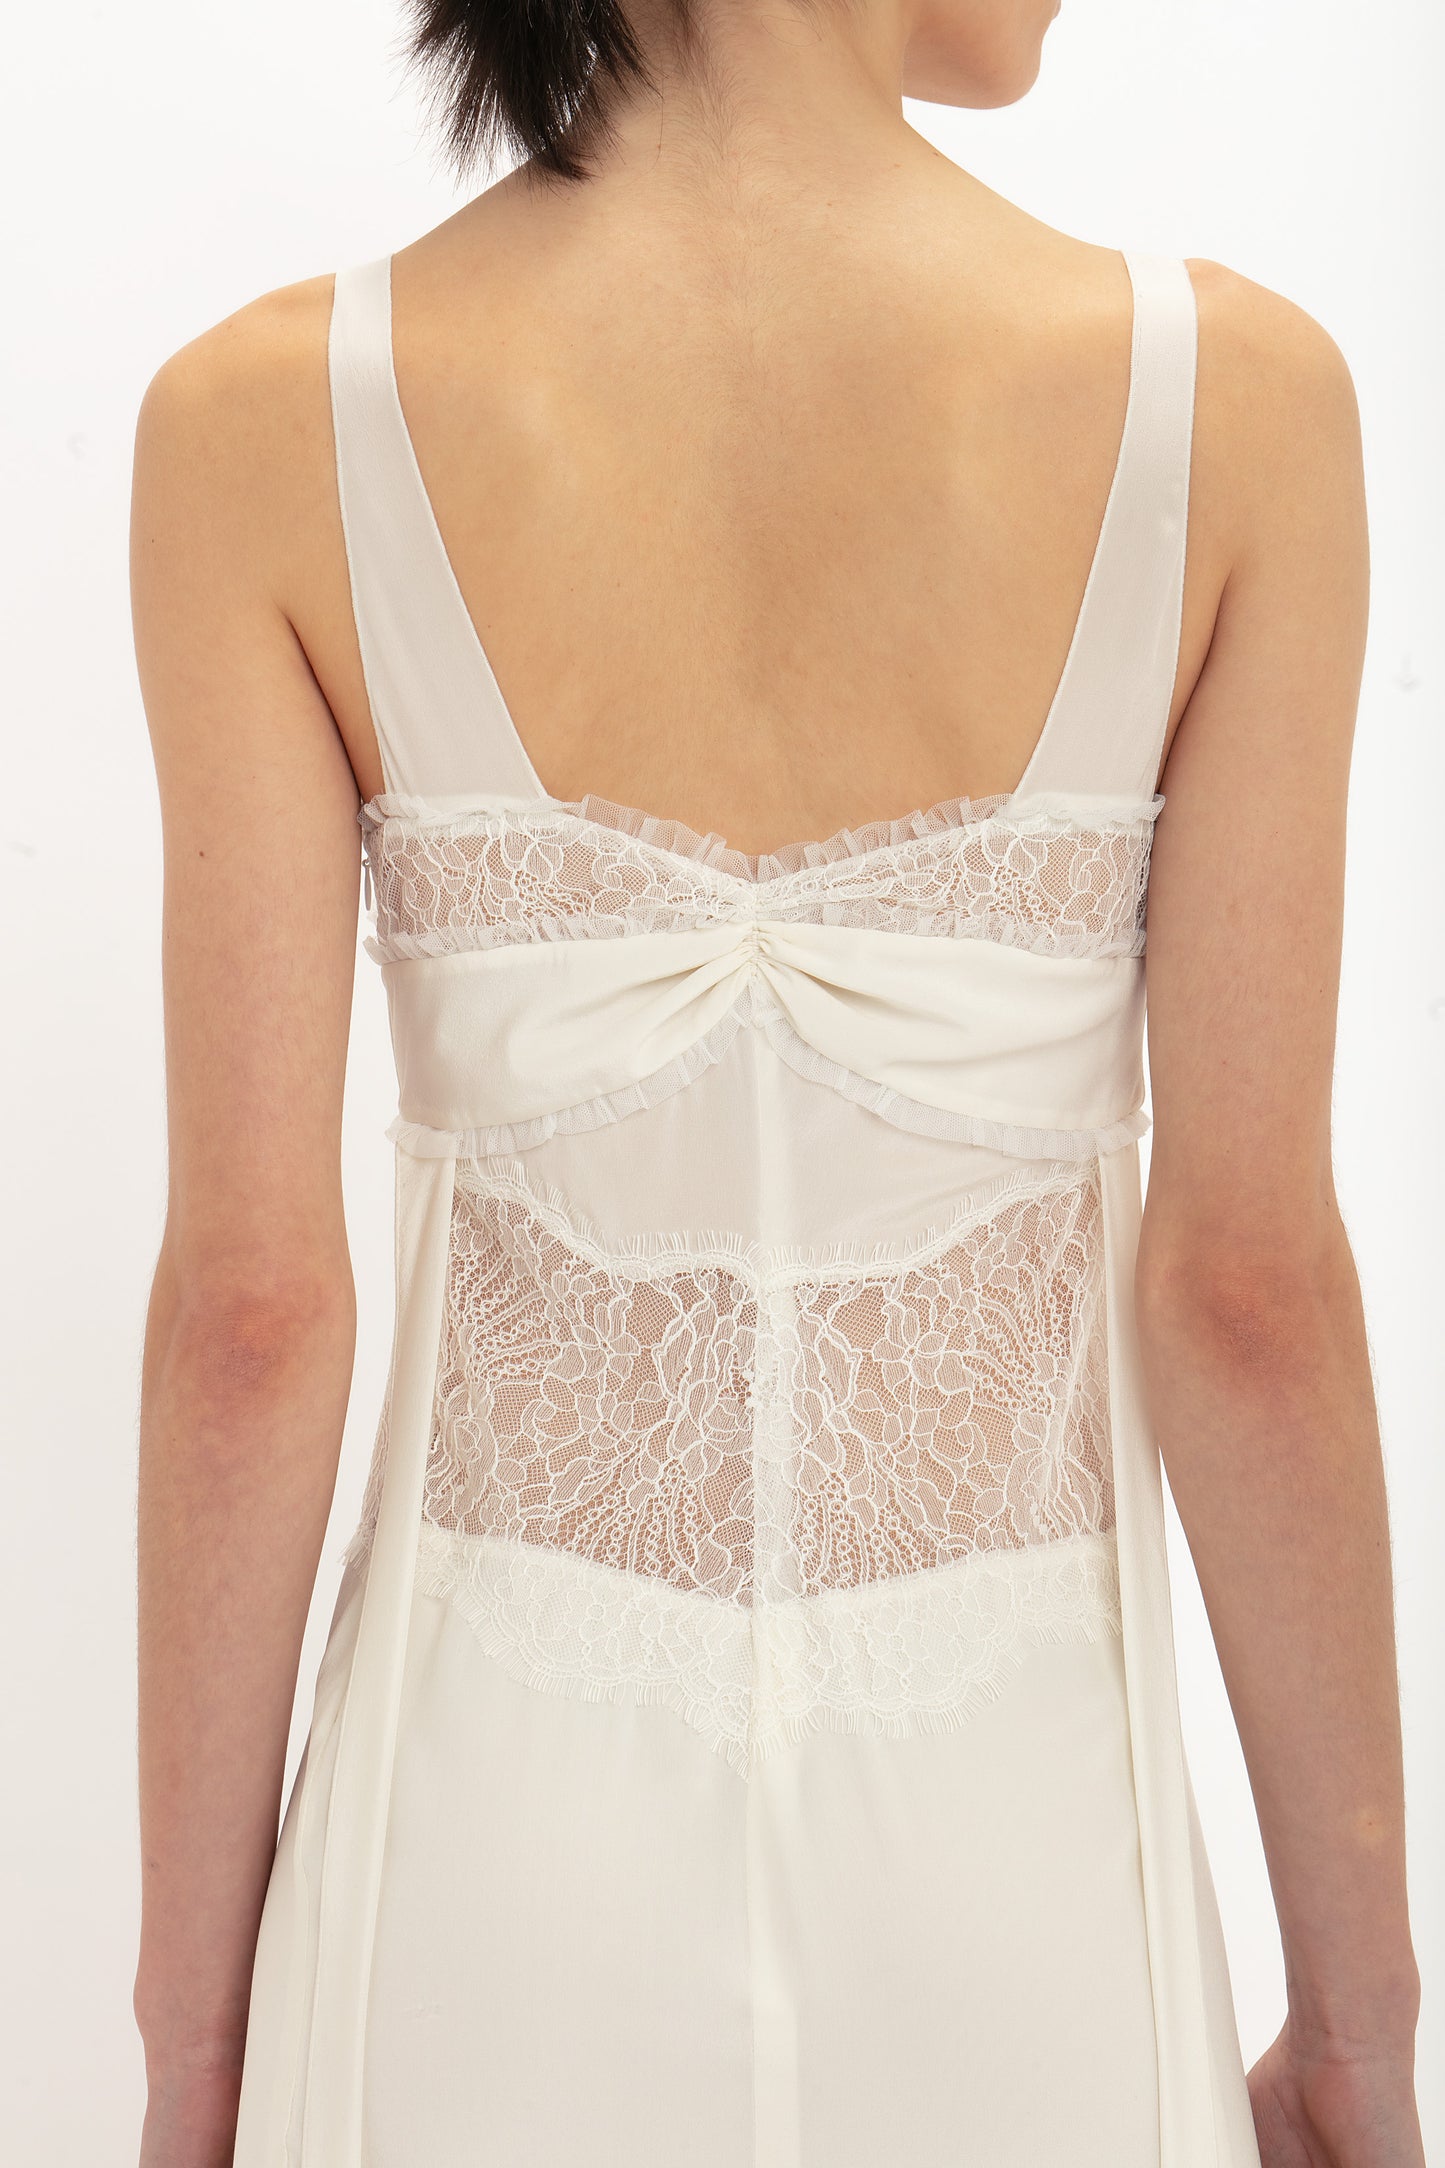 A person is shown from the back in a Ruffle Detail Midi Dress In Ivory by Victoria Beckham, highlighting the intricate tactile lace and fabric details.